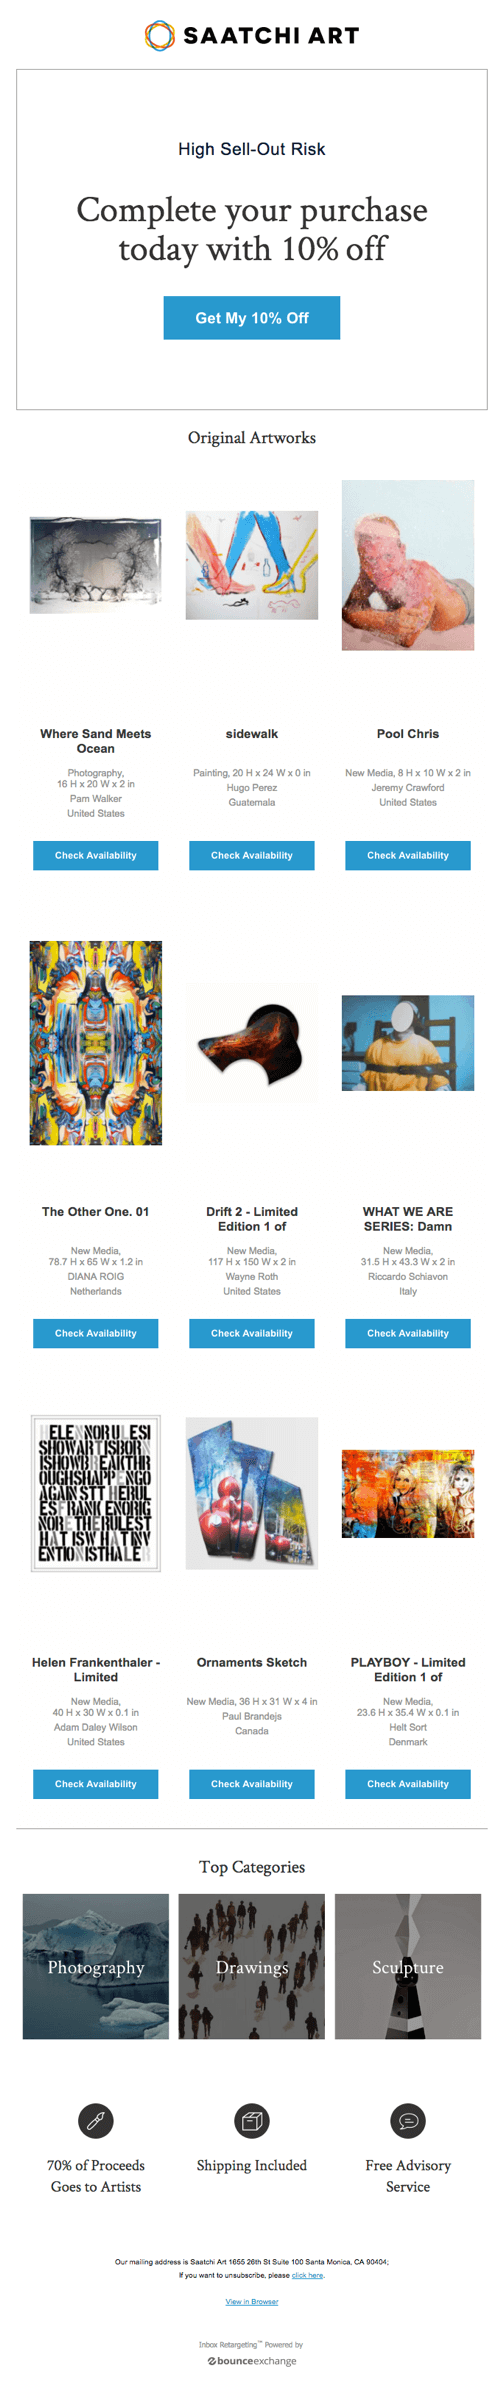 Saatchi Art offers a 10% discount for customers that have abandoned their cart. 